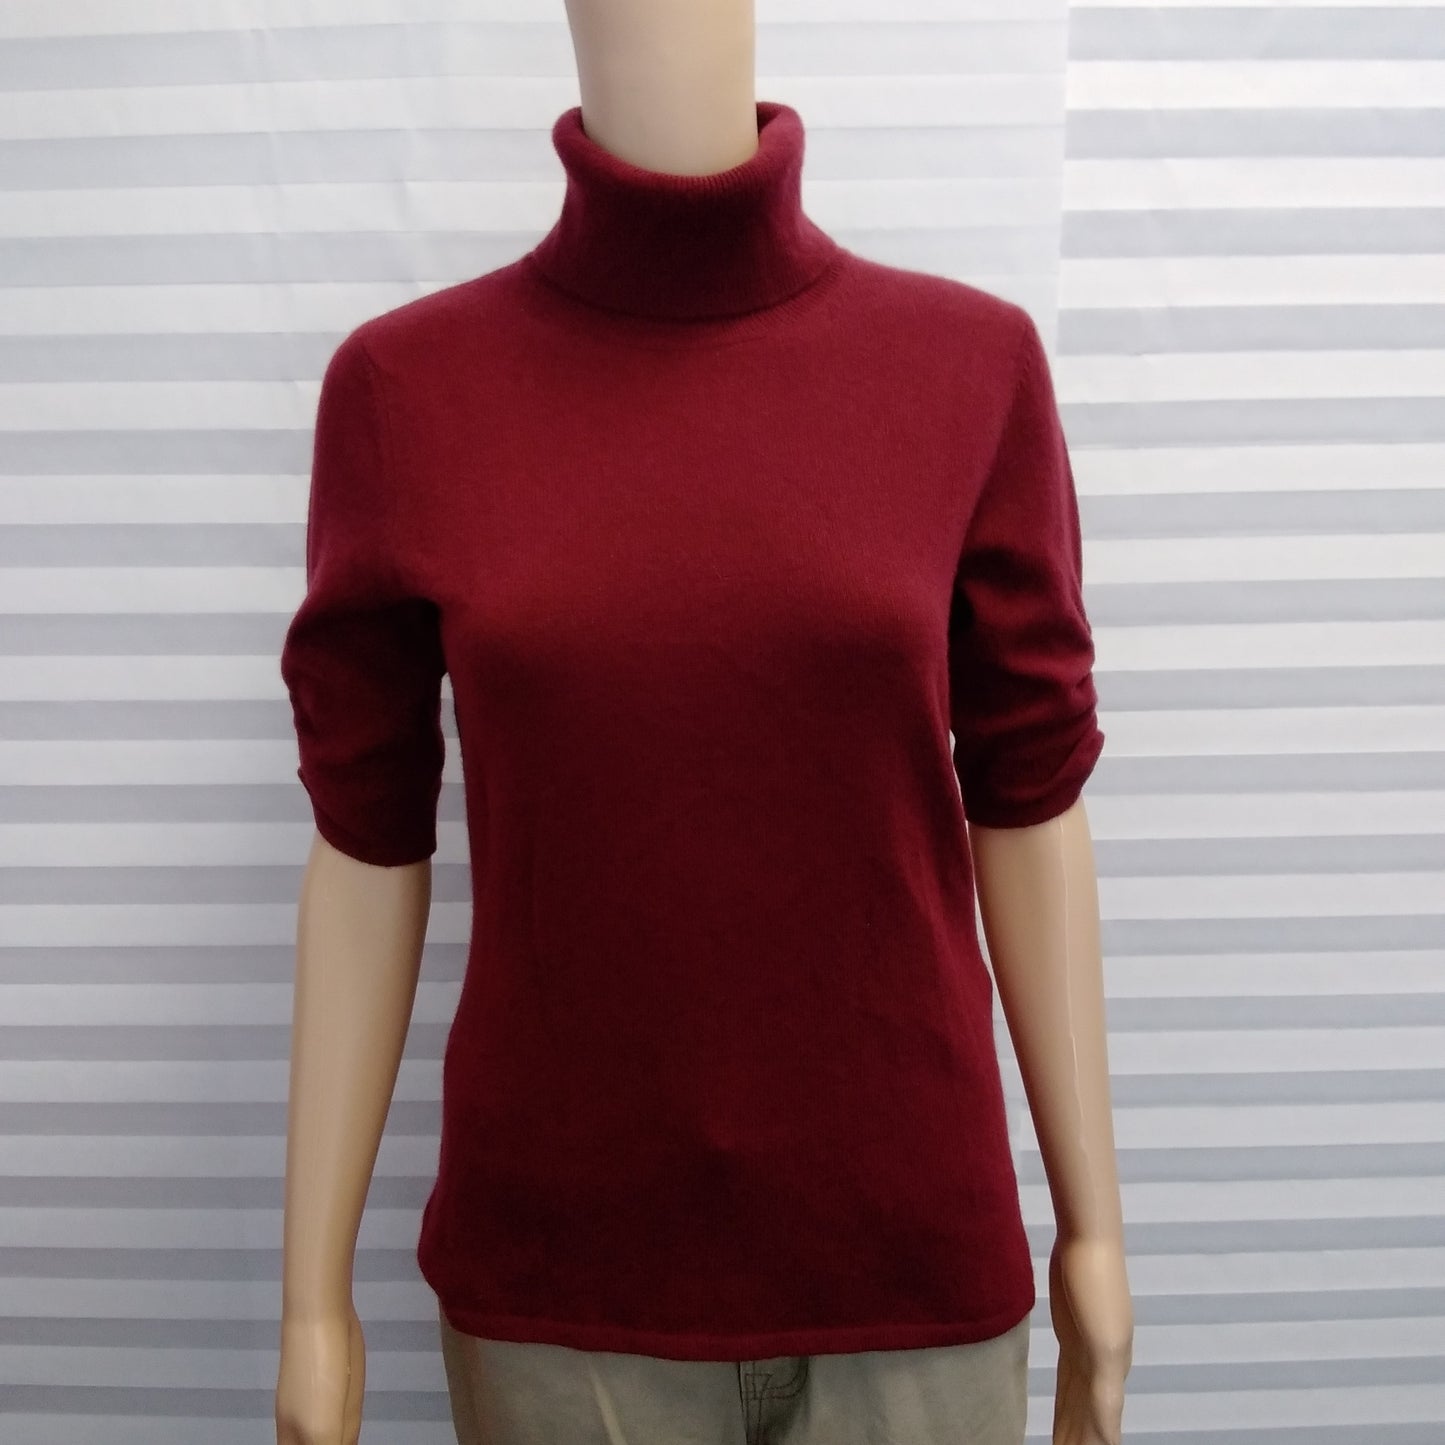 Neiman Marcus Cashmere Collection Plumb Turtle Neck Sweater - Size: M